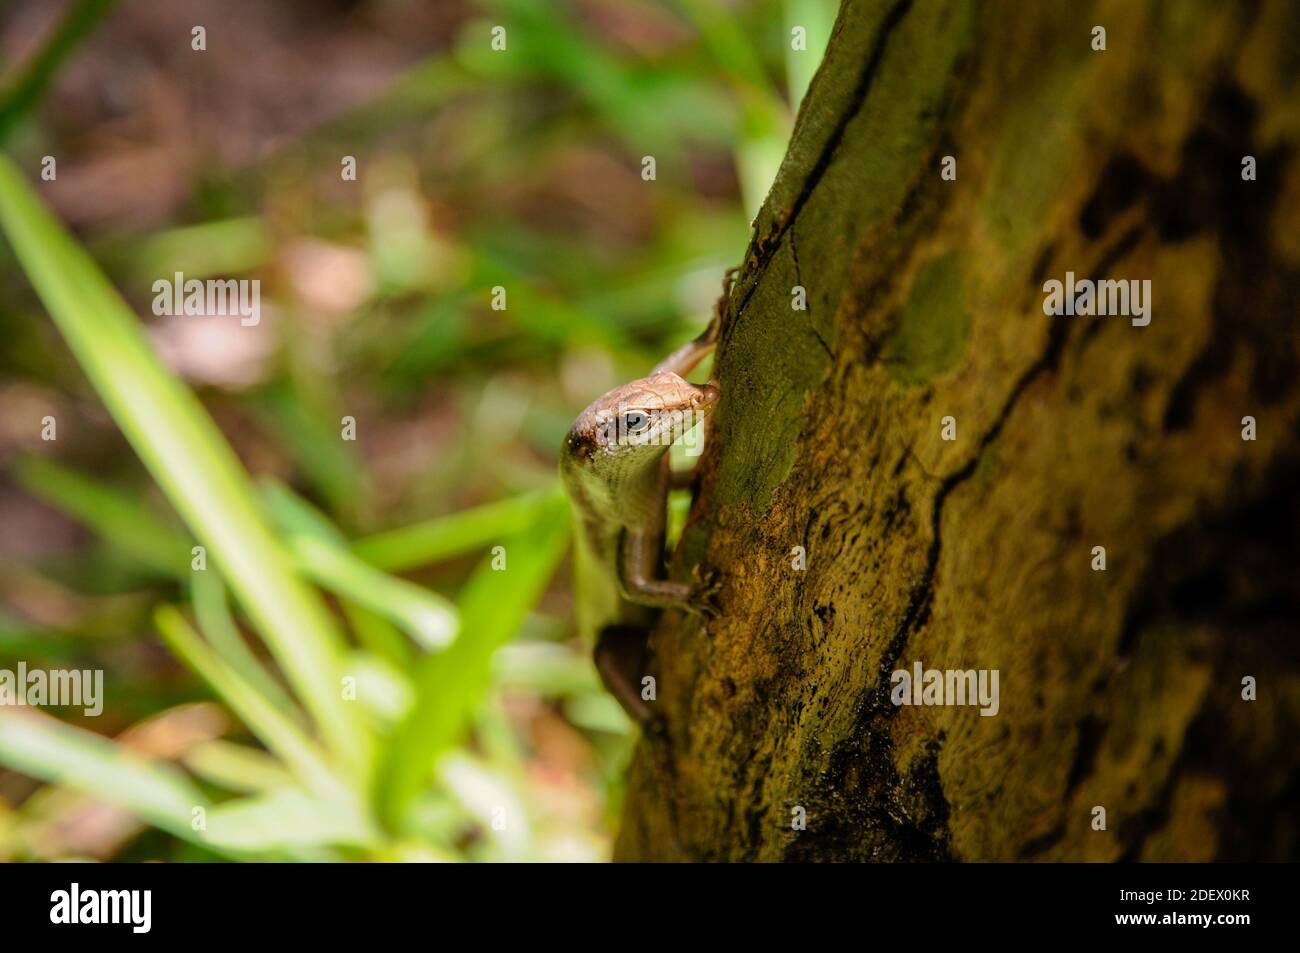 Brown Seychelles Skink (Trachylepis sechellensis) in the wild Stock Photo